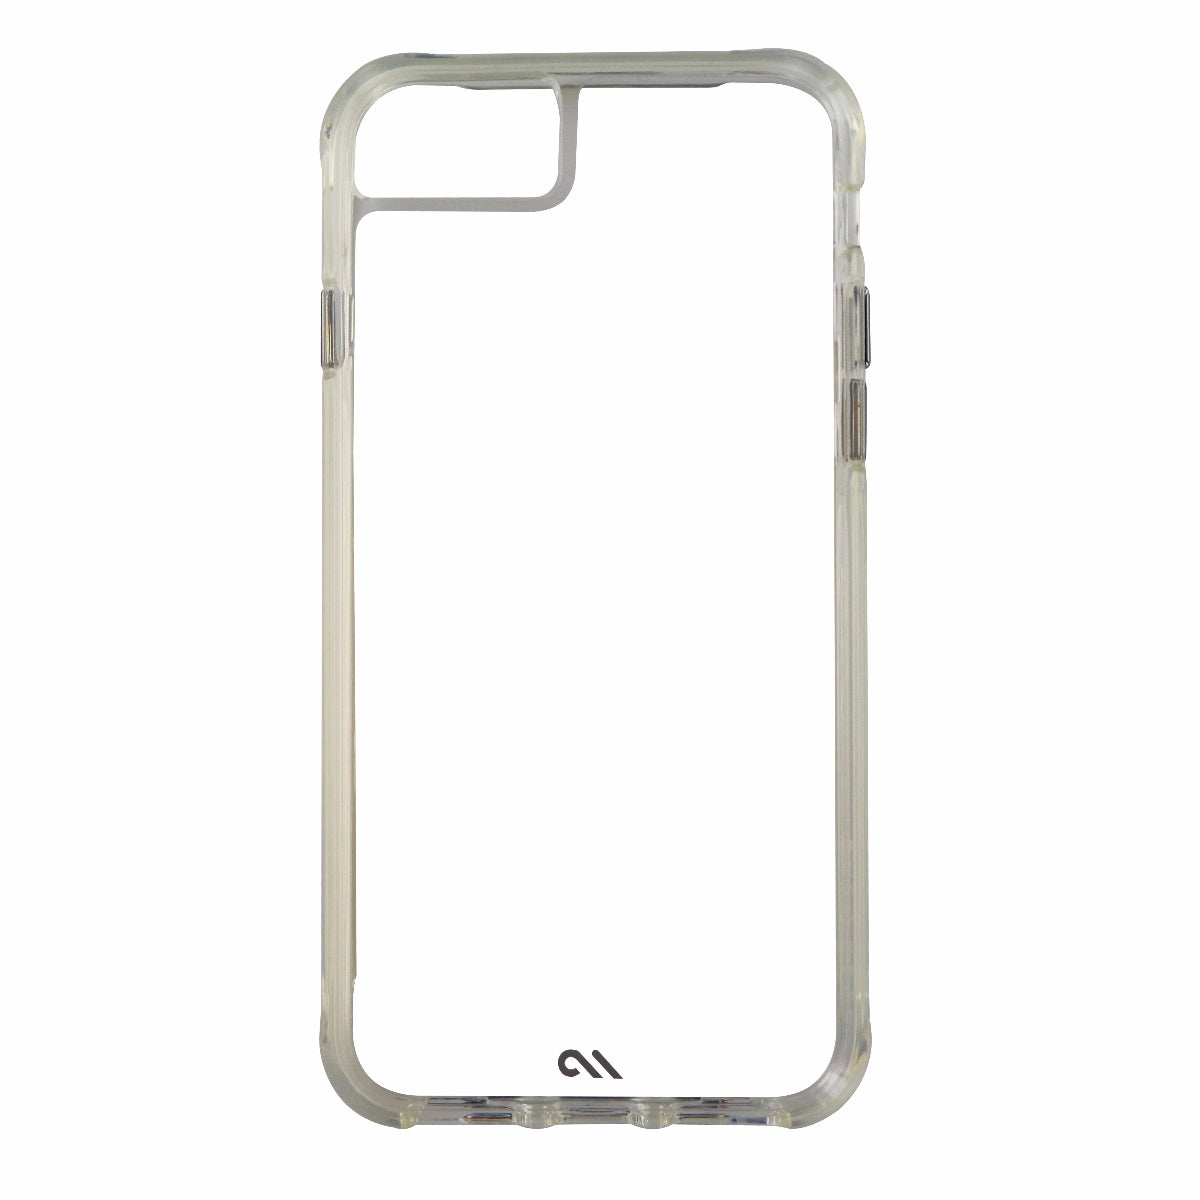 Case-Mate Tough Clear Series Protective Case Cover for iPhone 8 7 - Clear